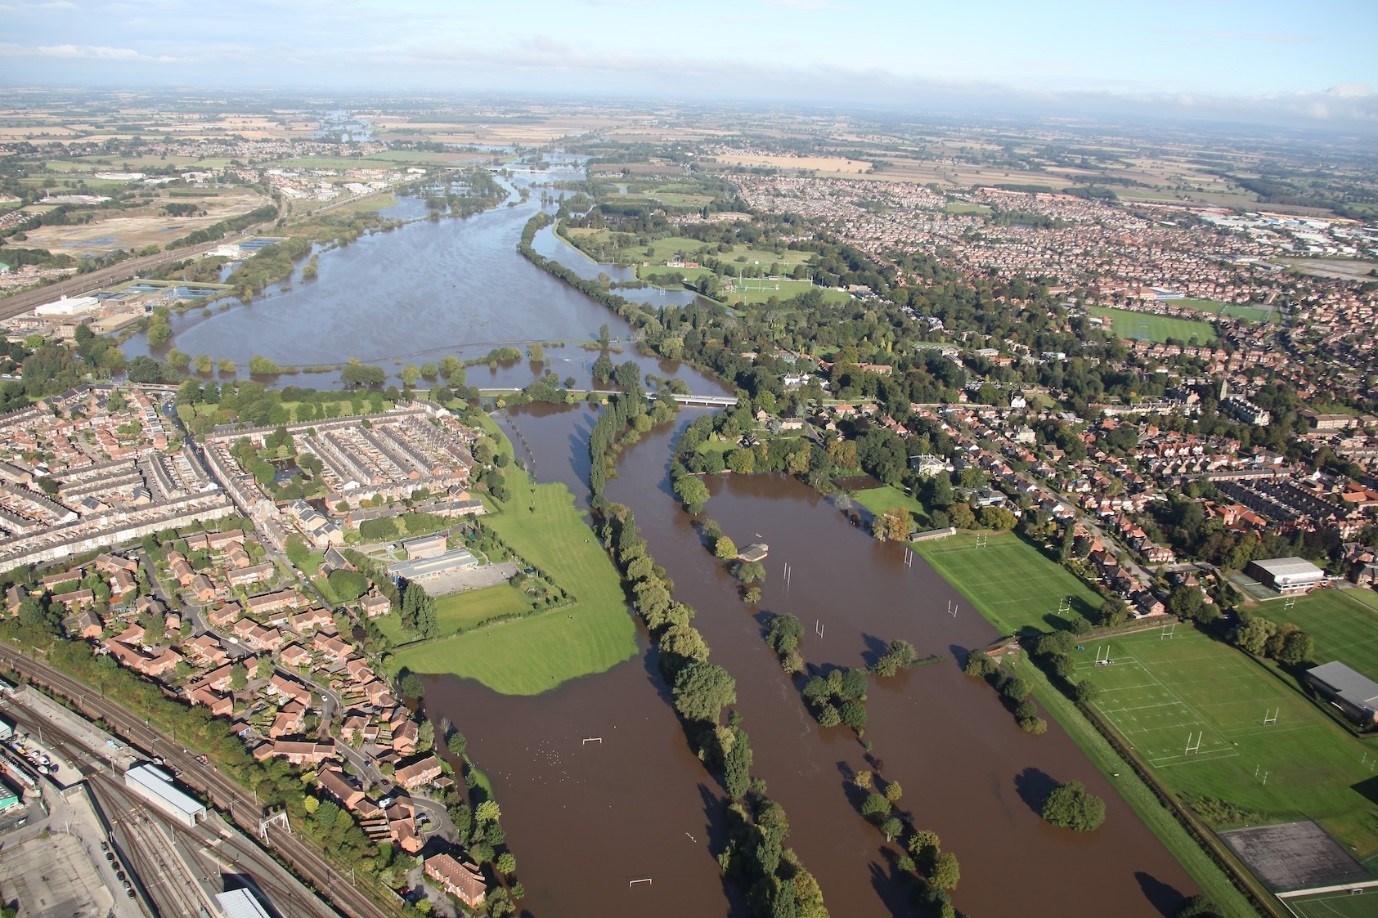 A birds-eye view of Clifton Ings during the September 2012 flooding